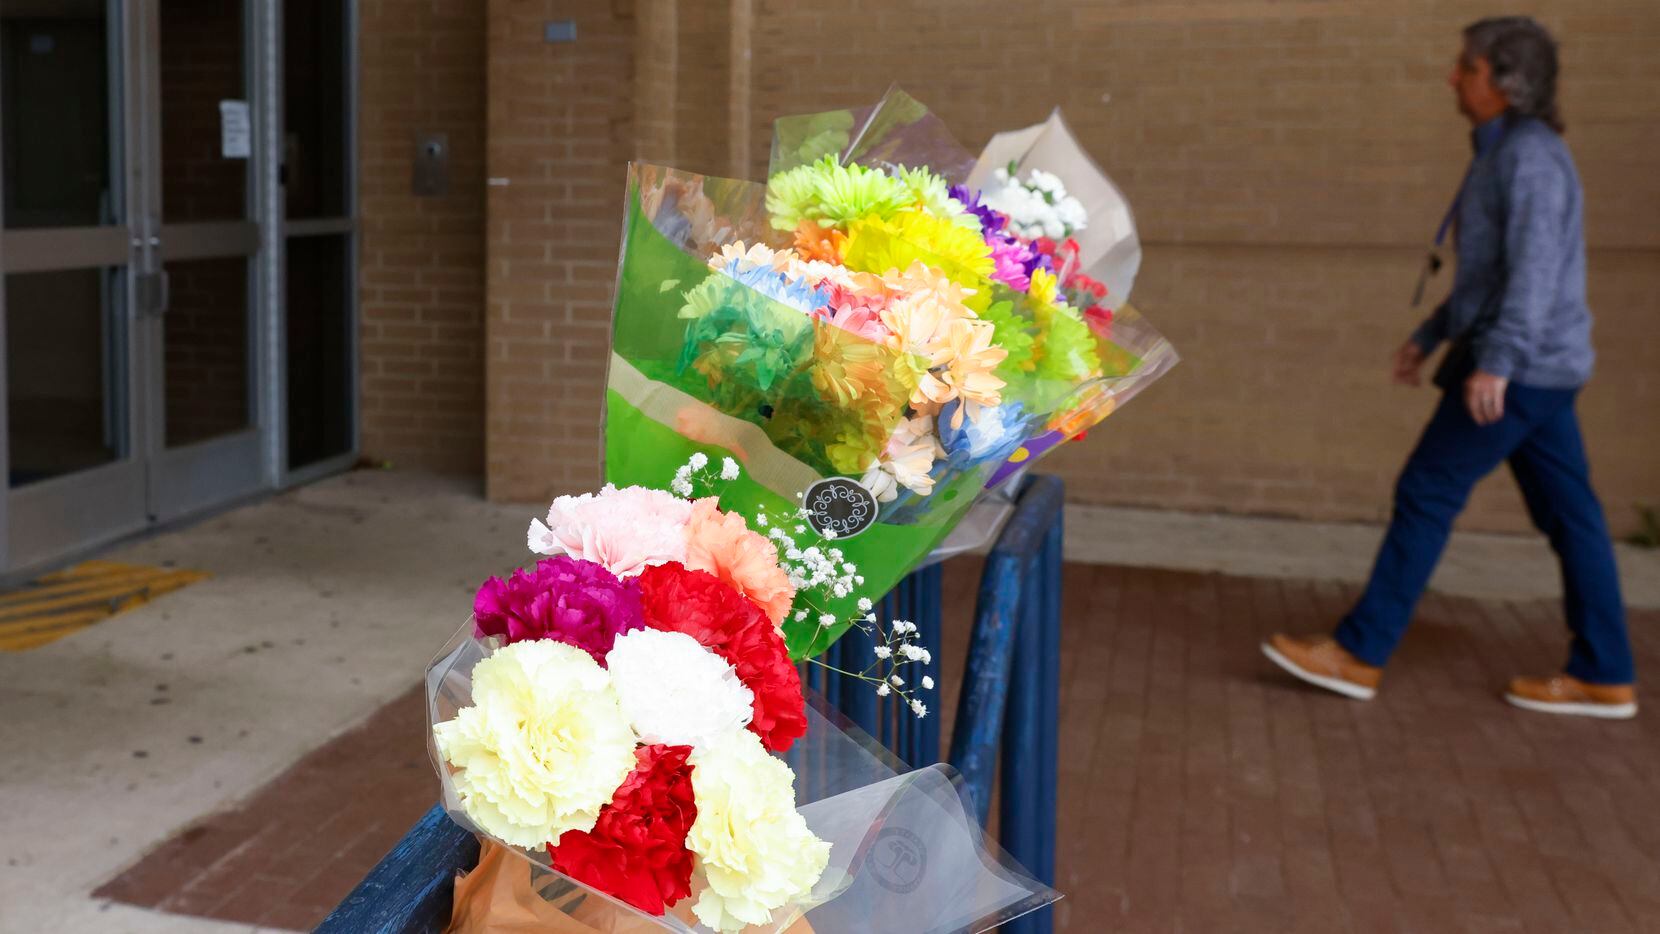 Flowers were placed at the front entrance of Lamar High School on Tuesday, a day after one...